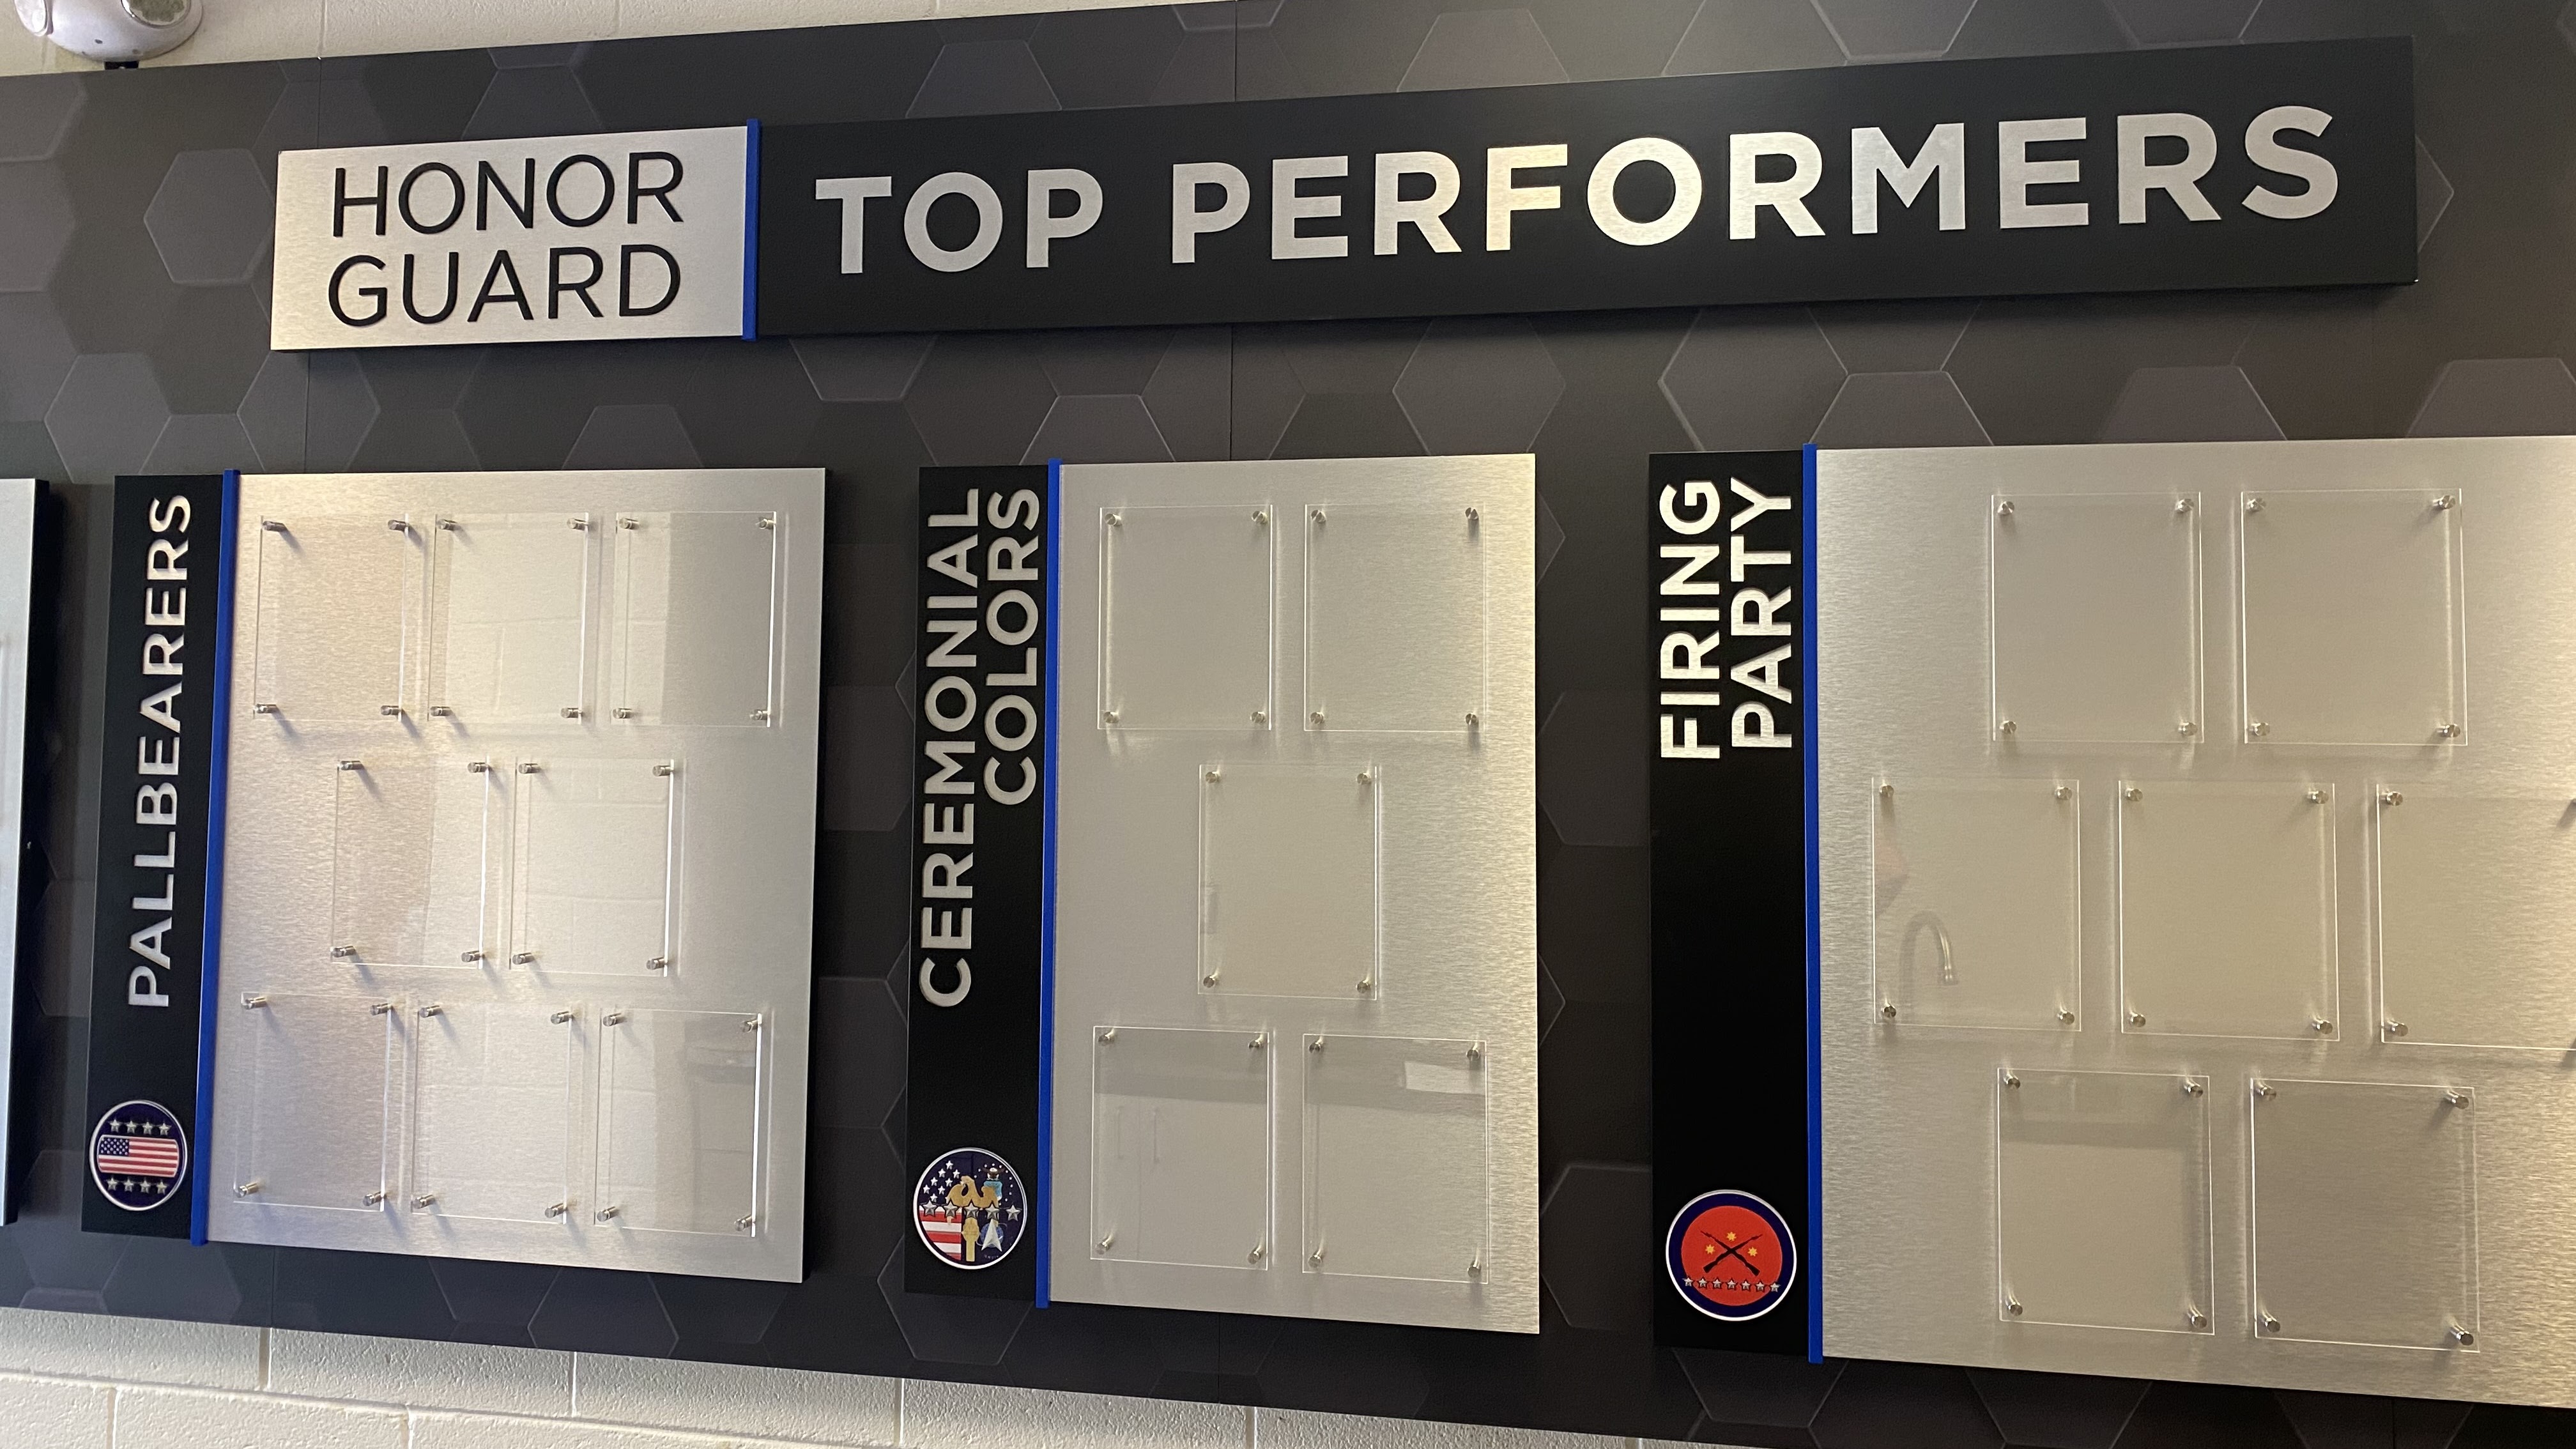 Top Performers recognition wall for Air Force base 